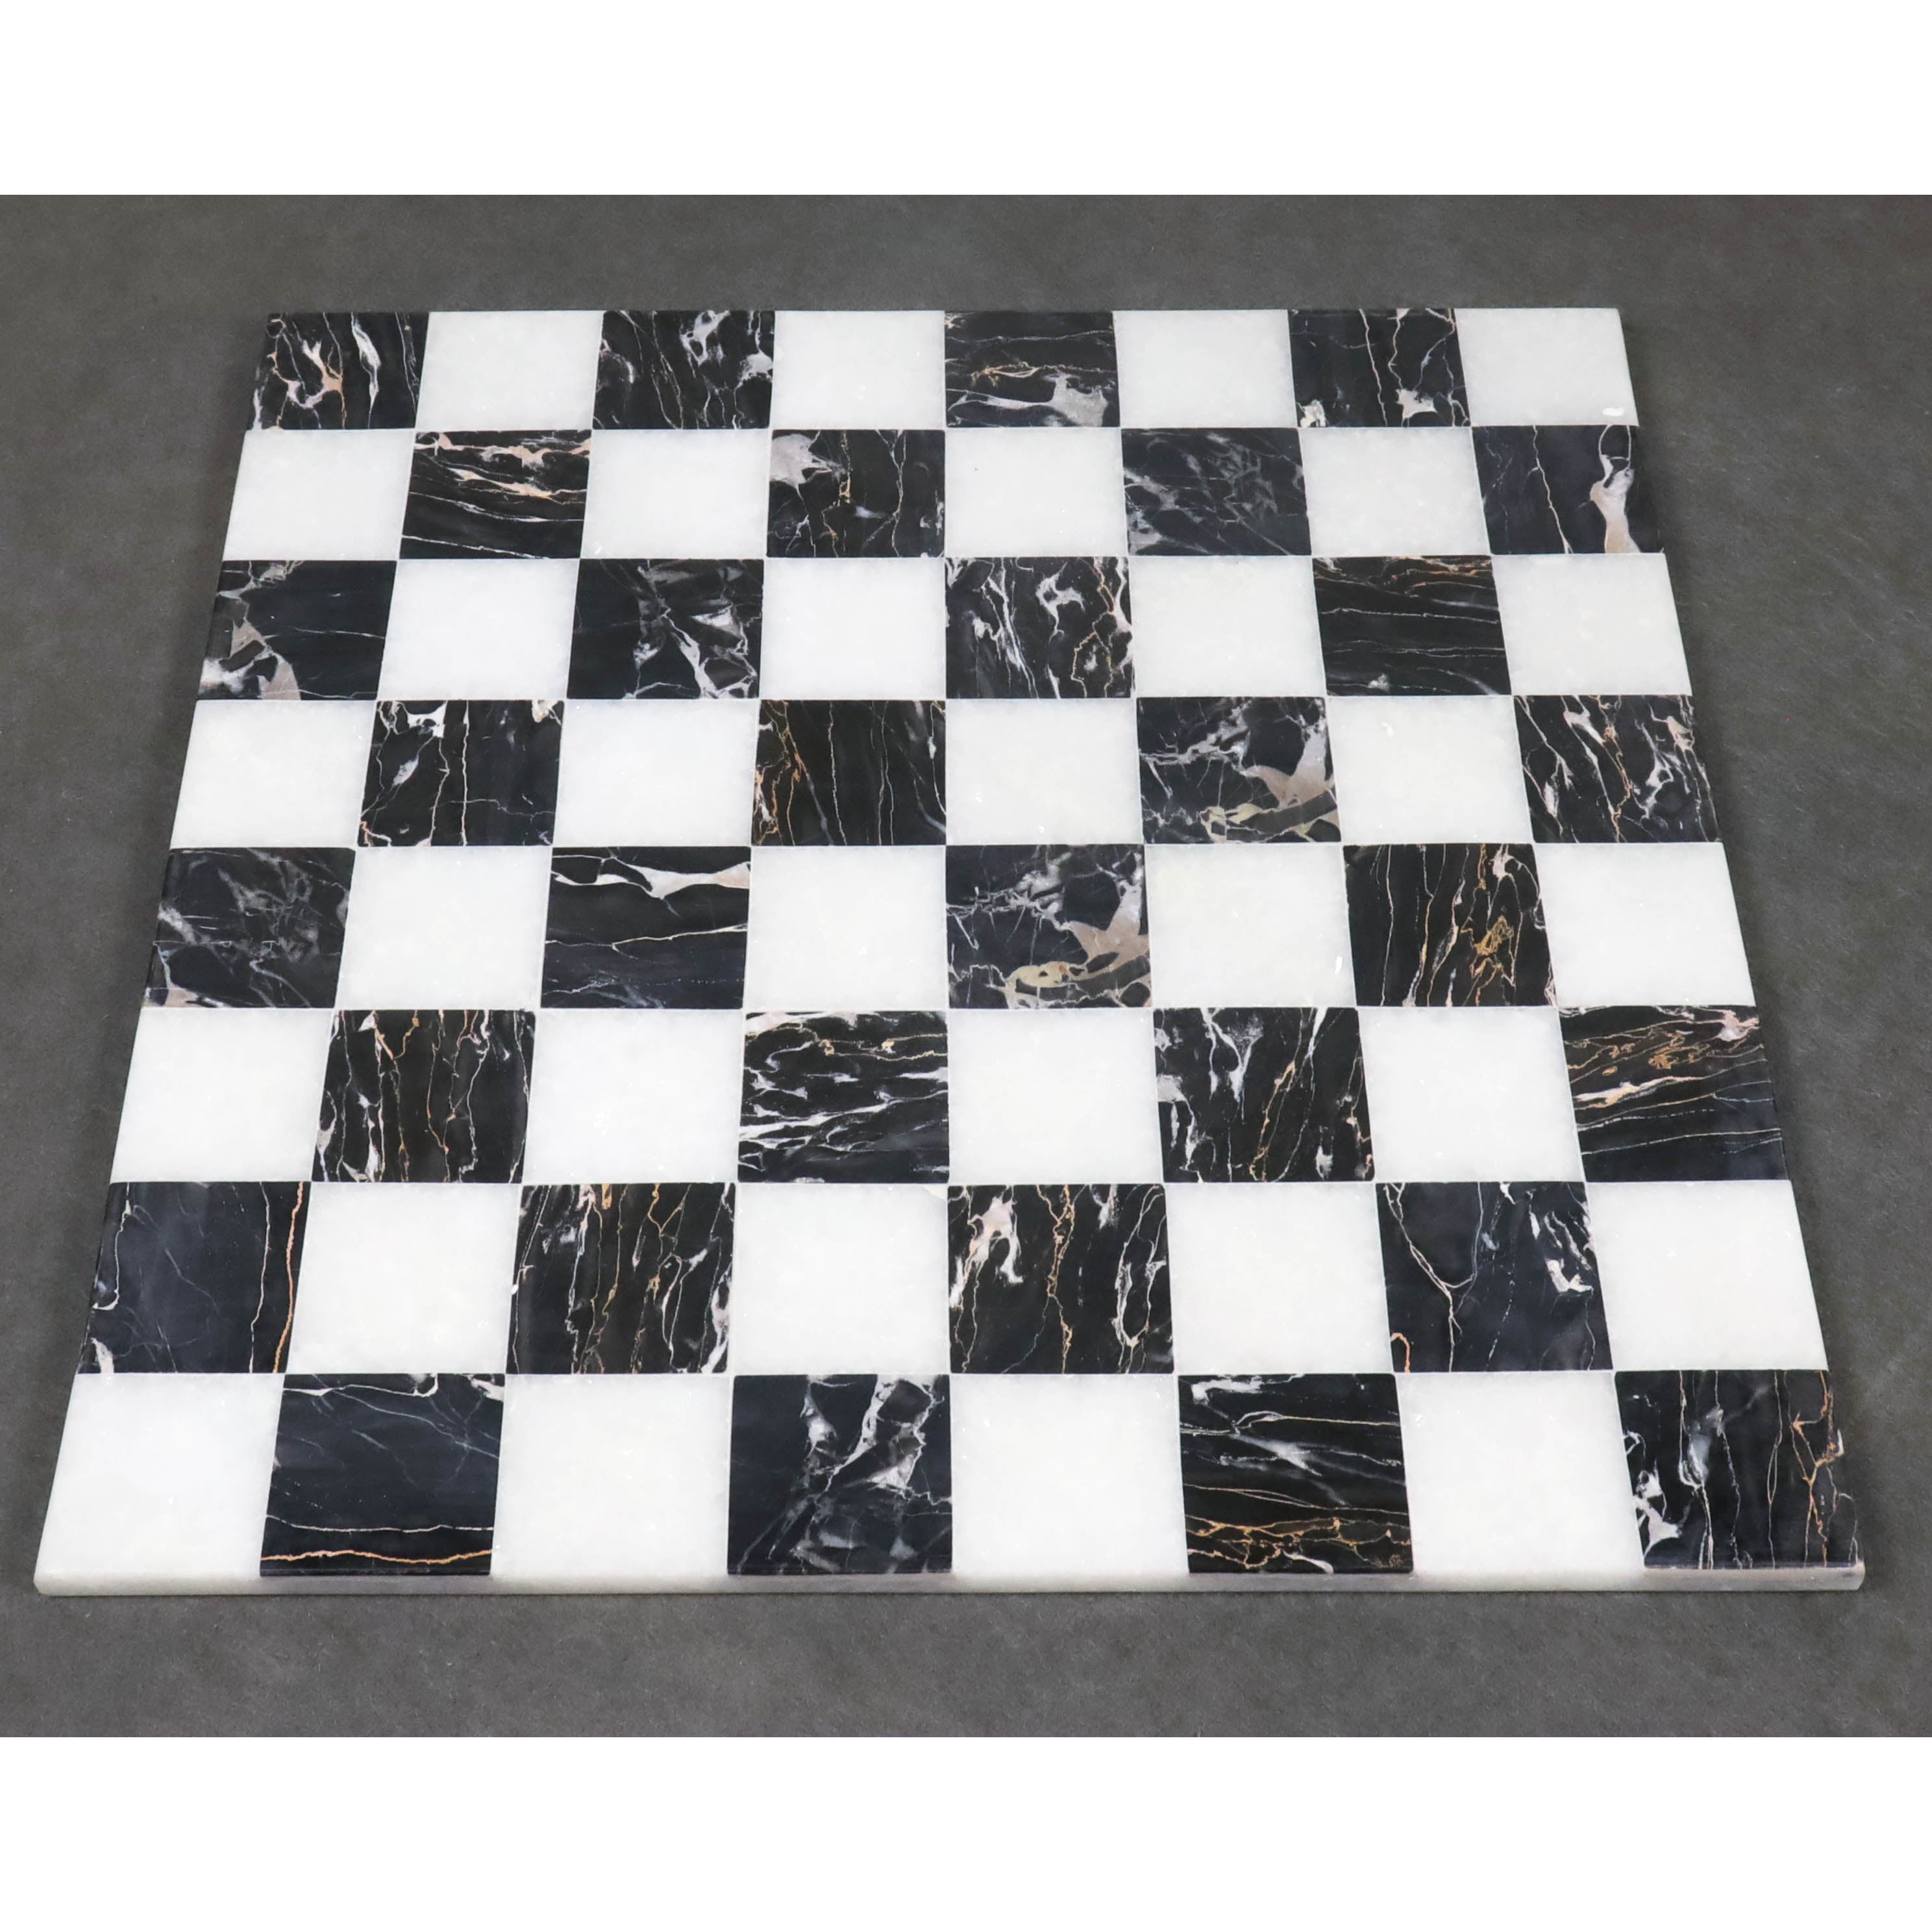 Black and White High-Quality Marble Chess Set